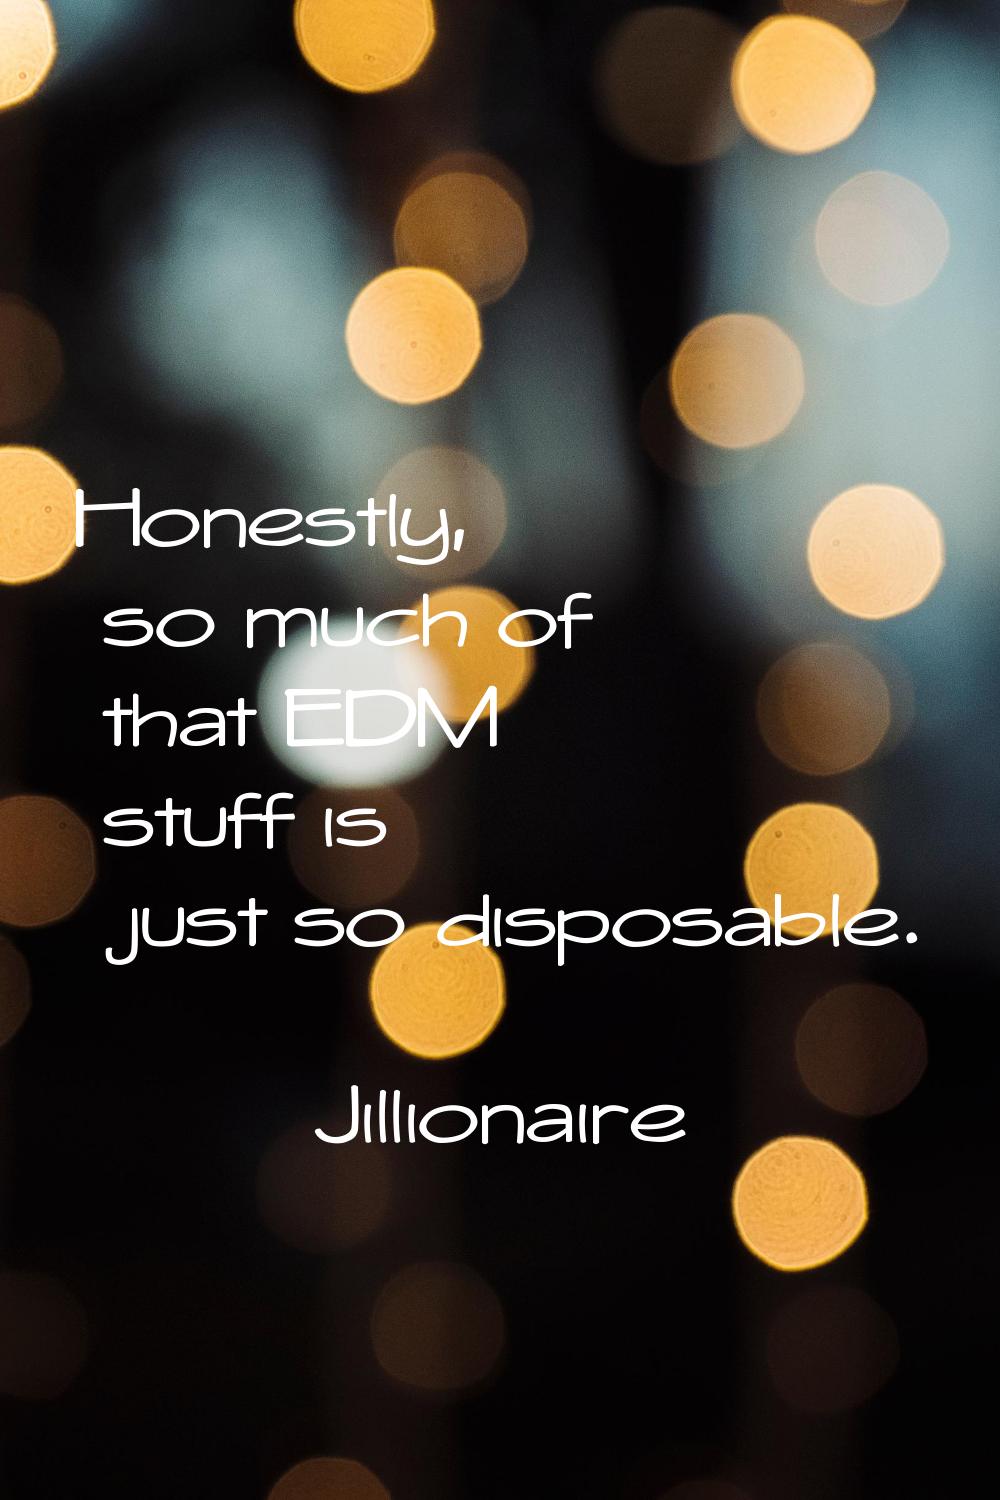 Honestly, so much of that EDM stuff is just so disposable.